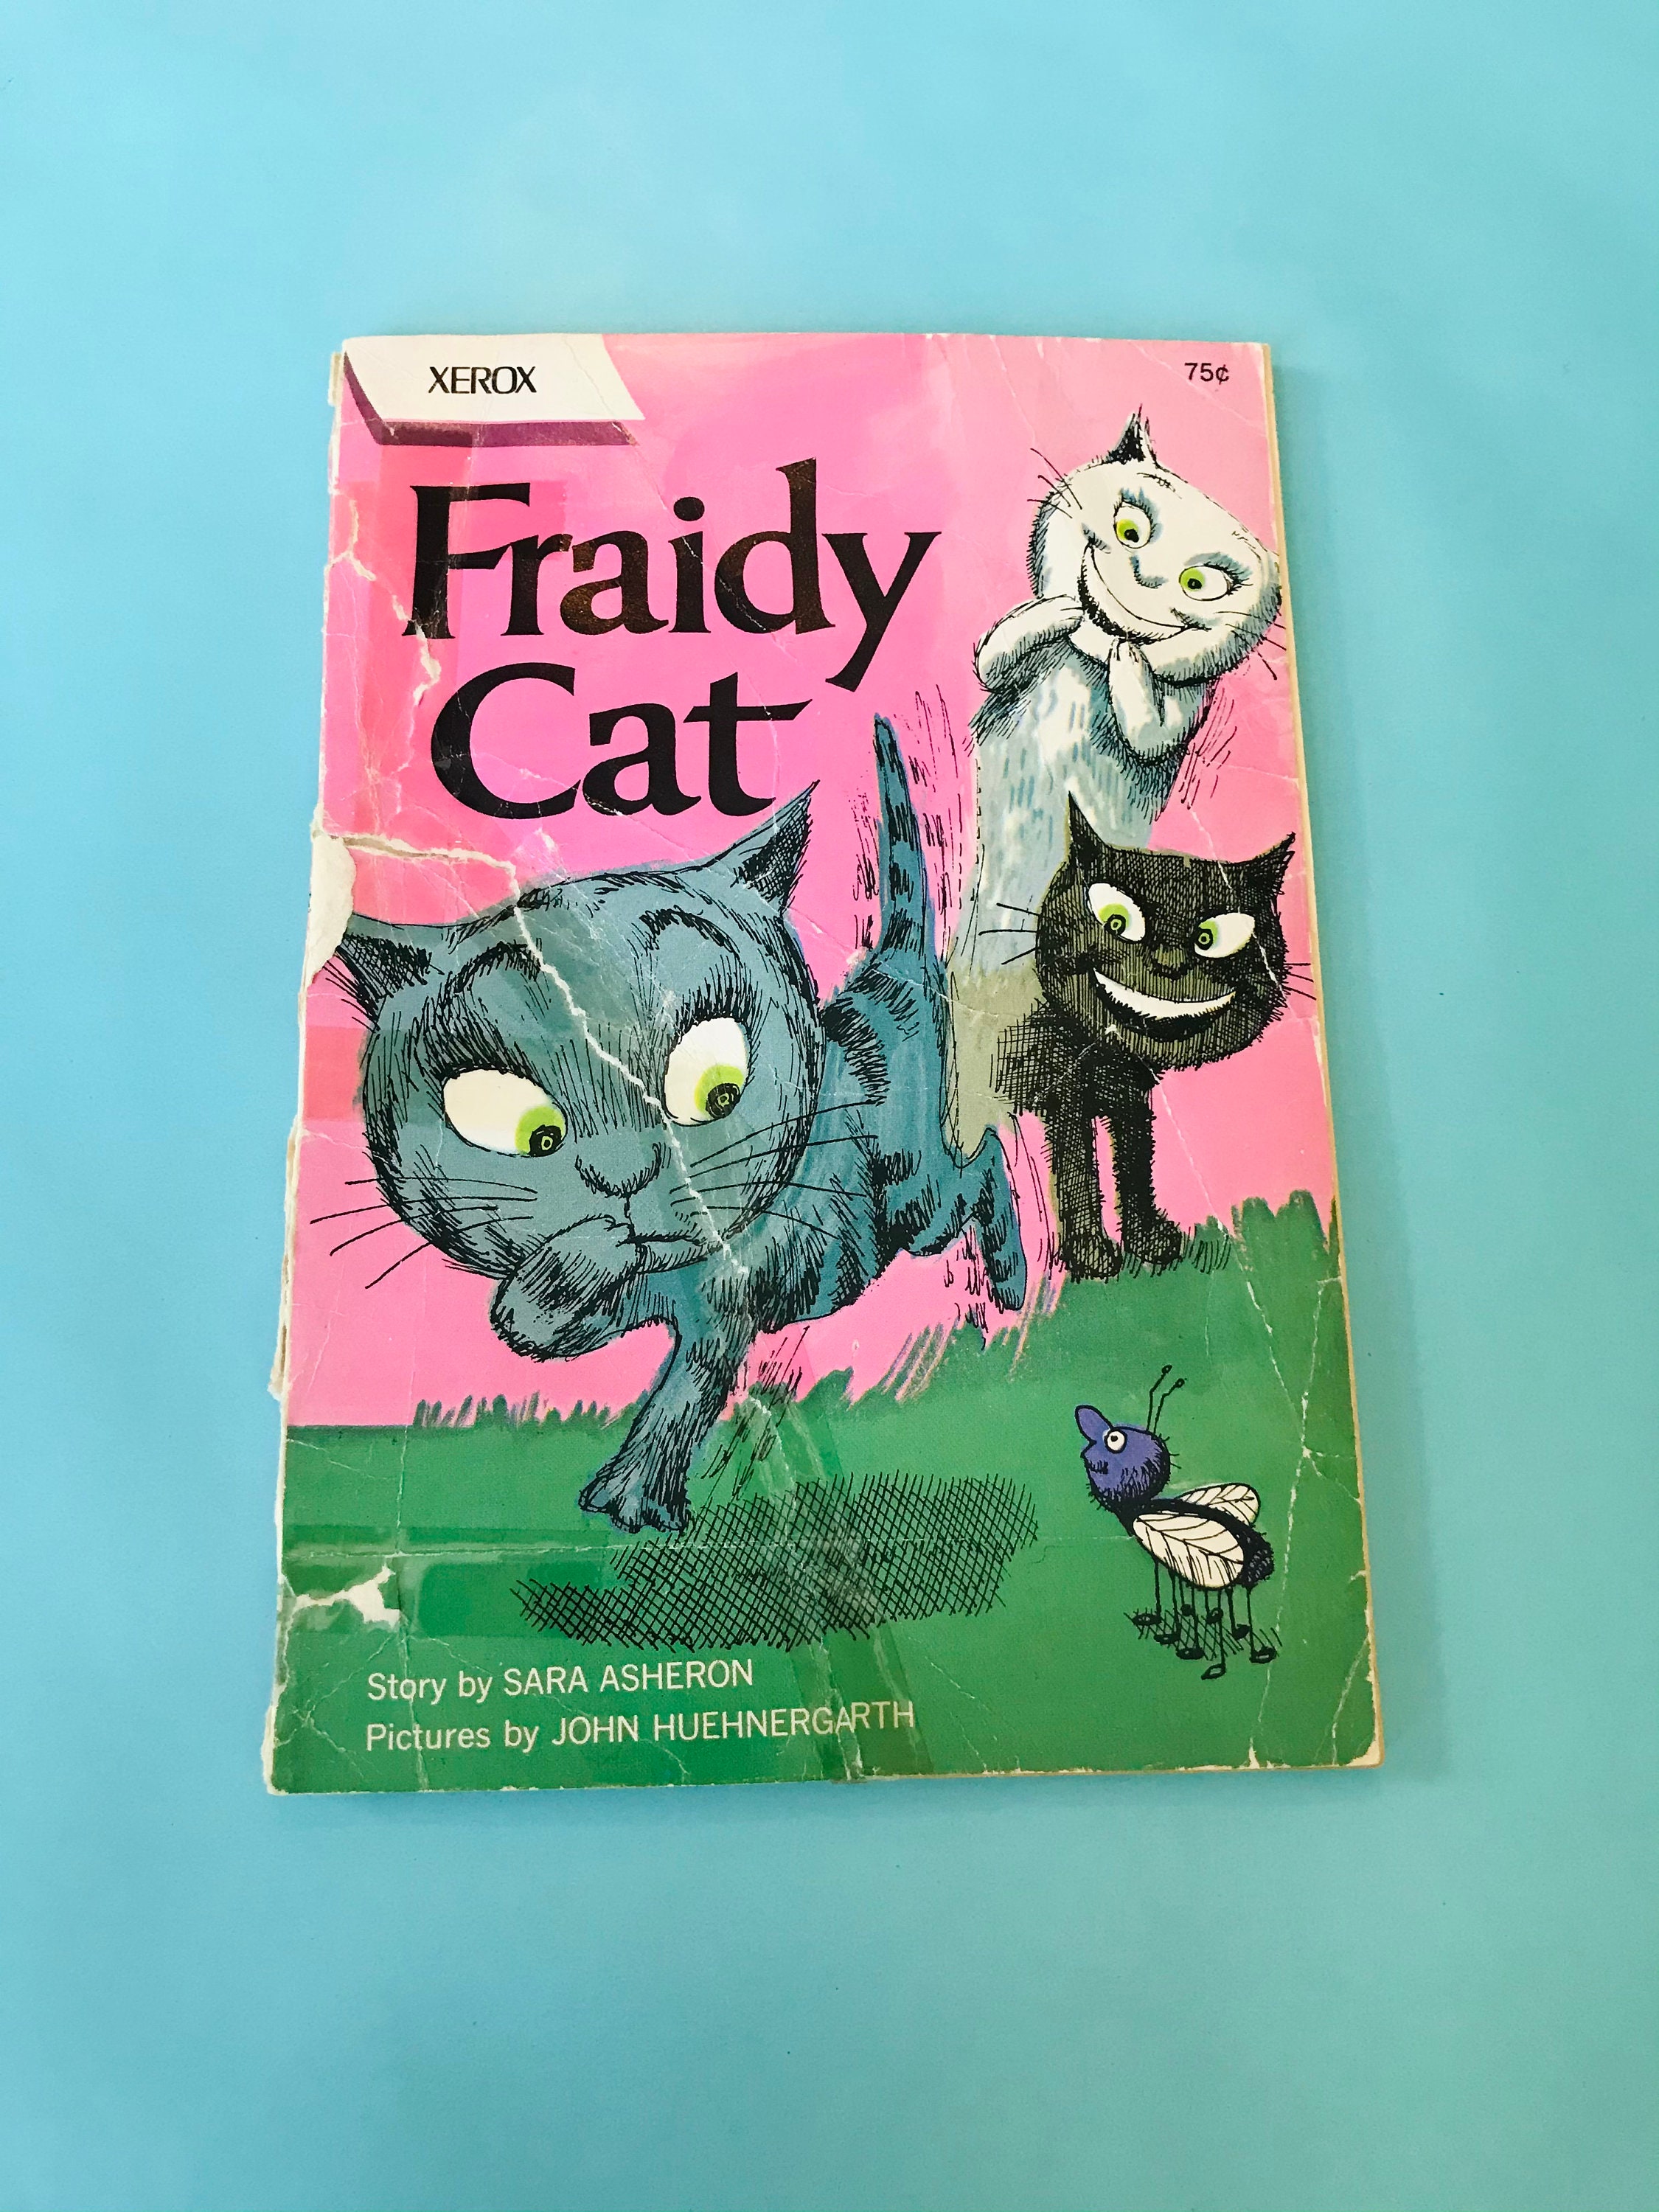 Vintage Fraidy Cat Small Paperback Picture Book by Sara Asheron Illustrated  by John Huehnergarth Published in 1970 by Xerox -  Australia